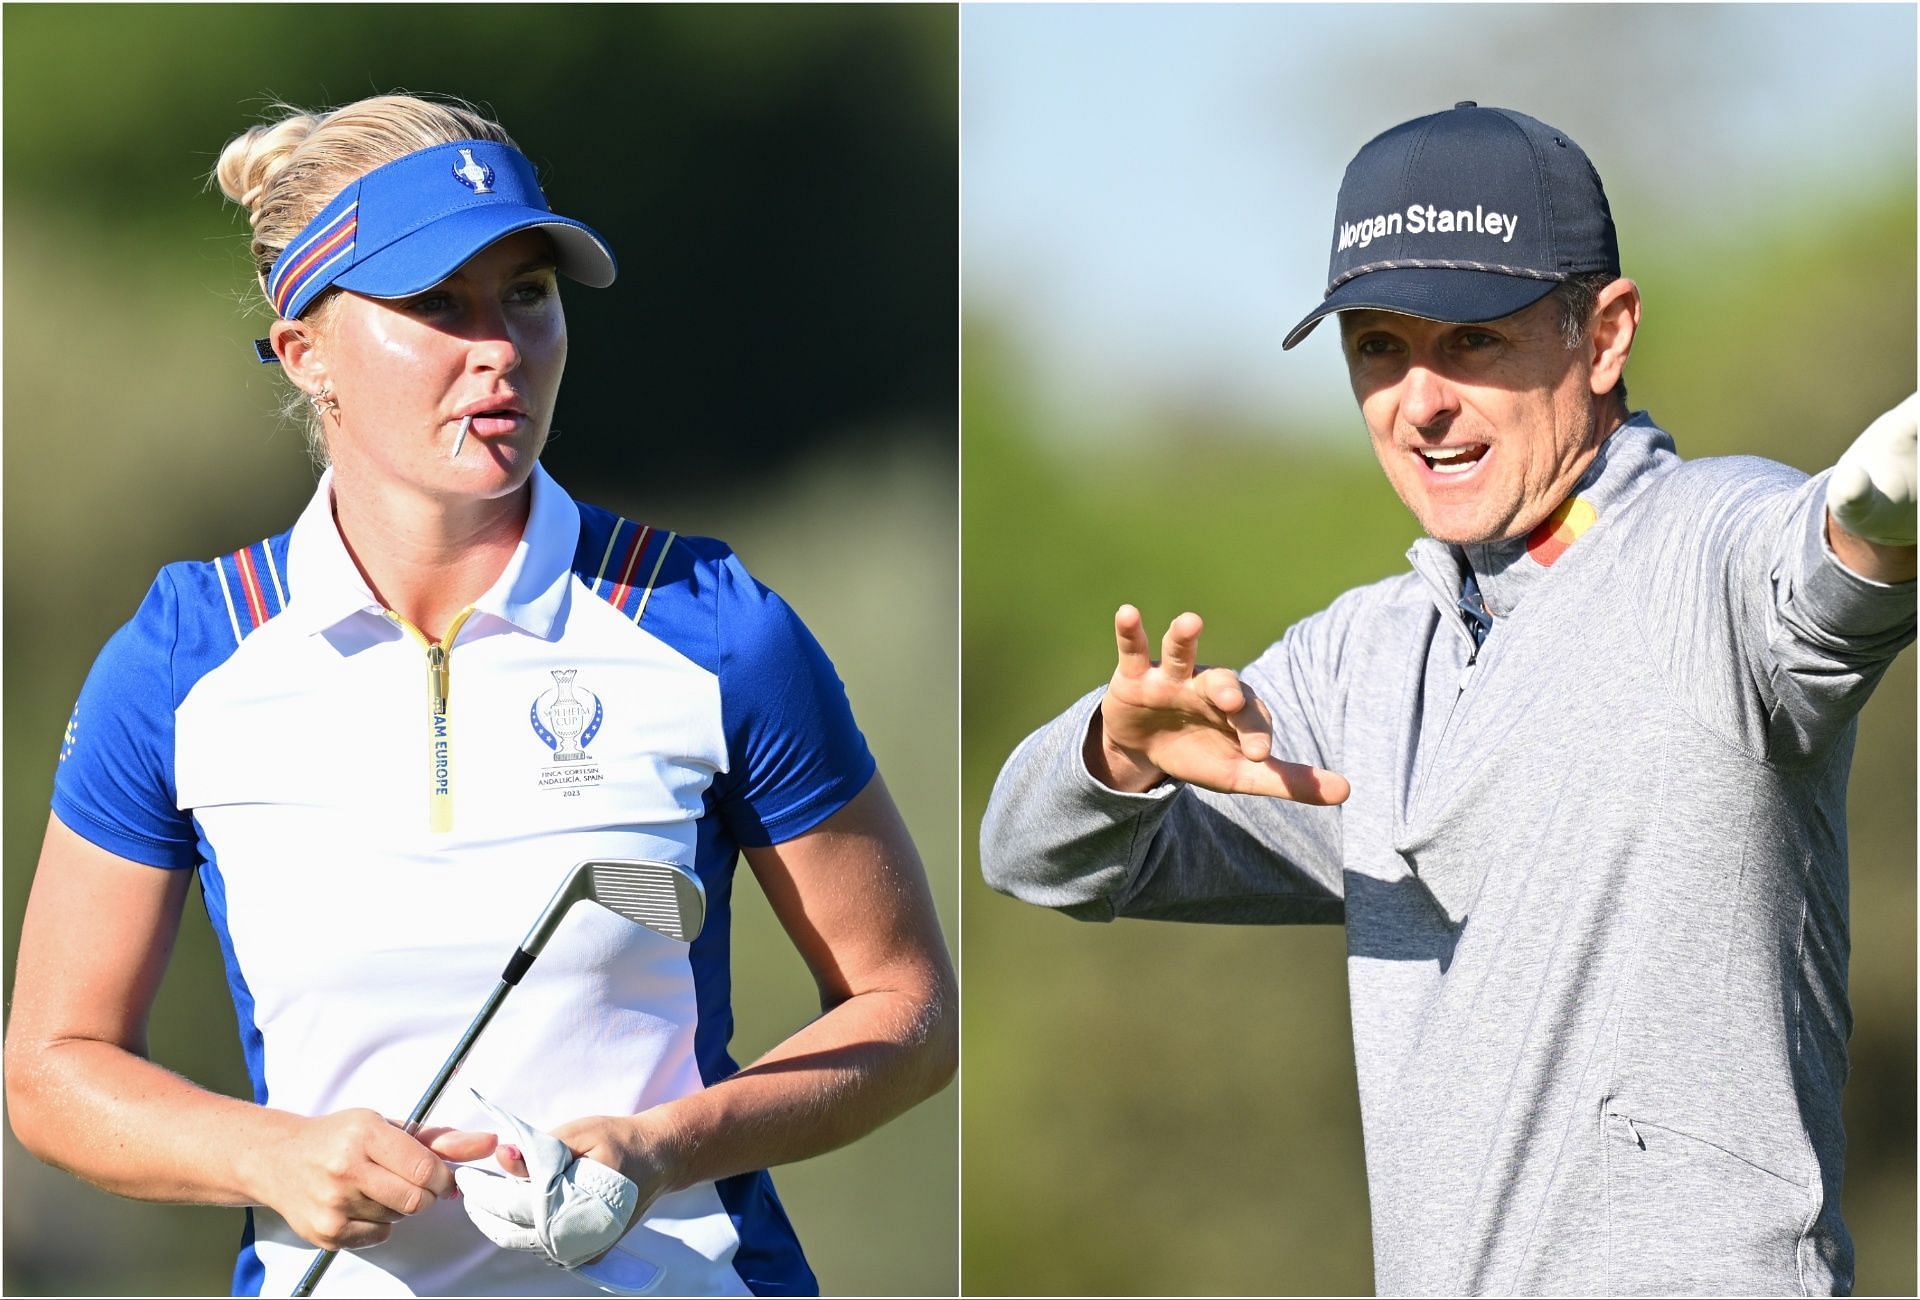 Charley Hull and Justin Rose (via Getty Images)